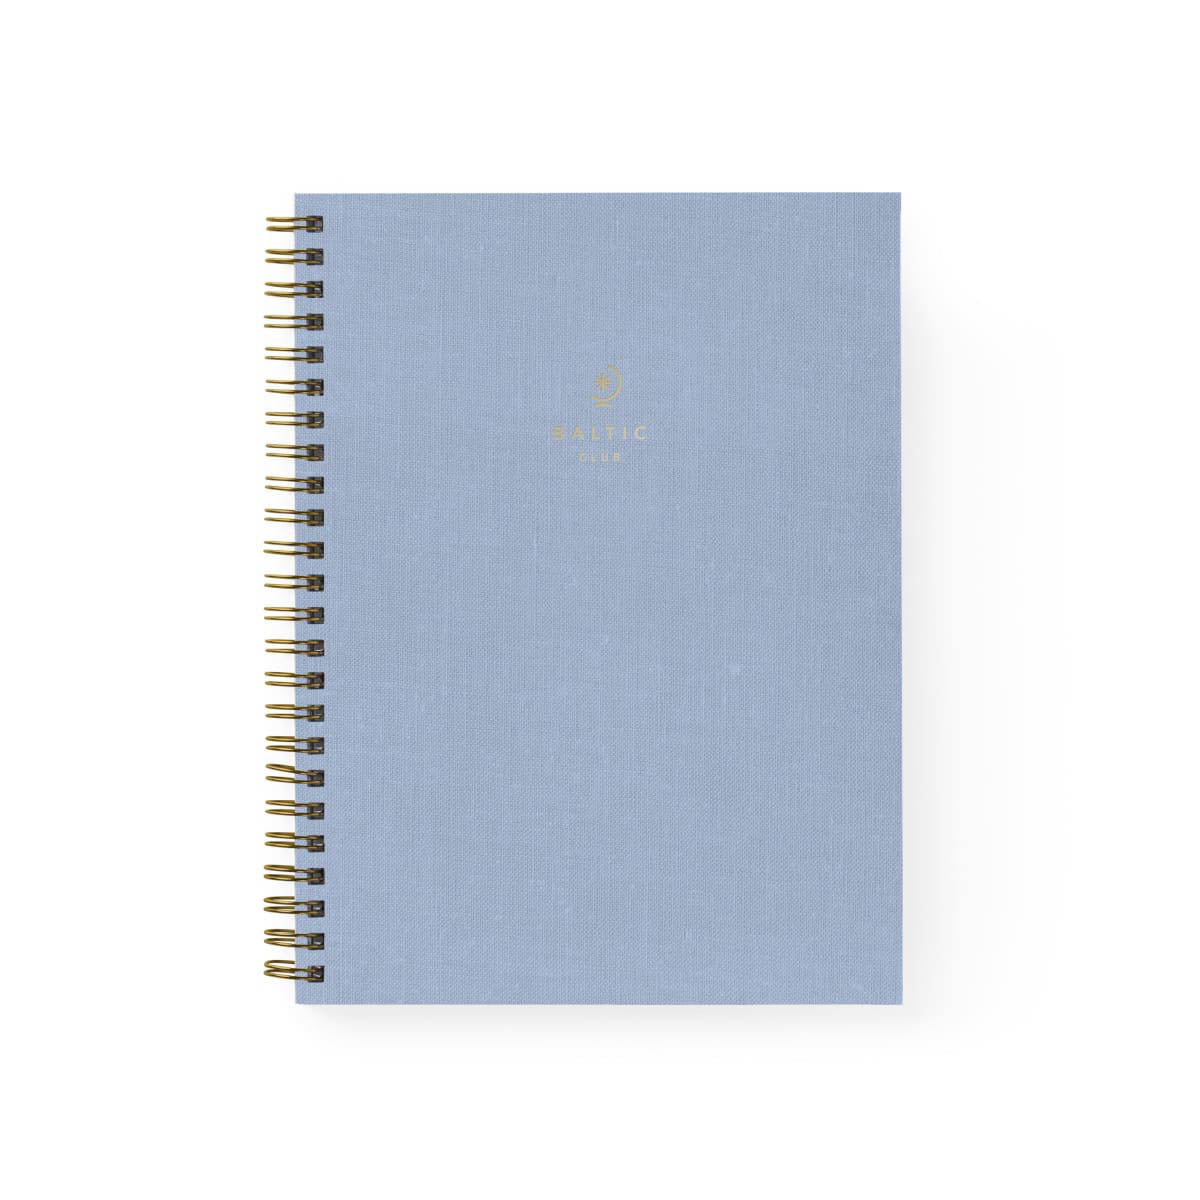 Baltic Club Spiral Notebook Blue Ash Cloth - Lined